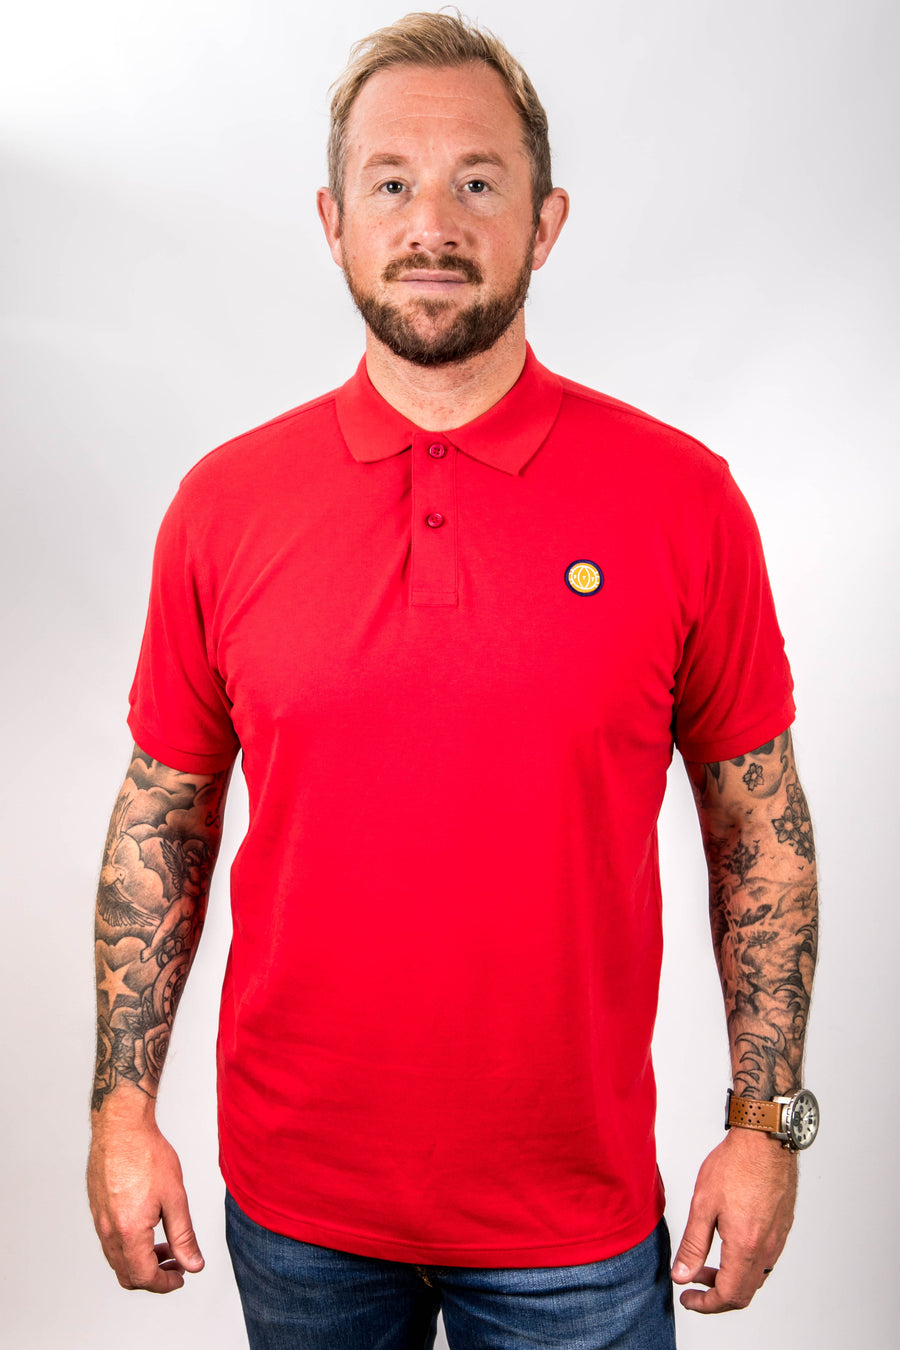 Outlet - 3XL Red Polo - Red and White Sleeve